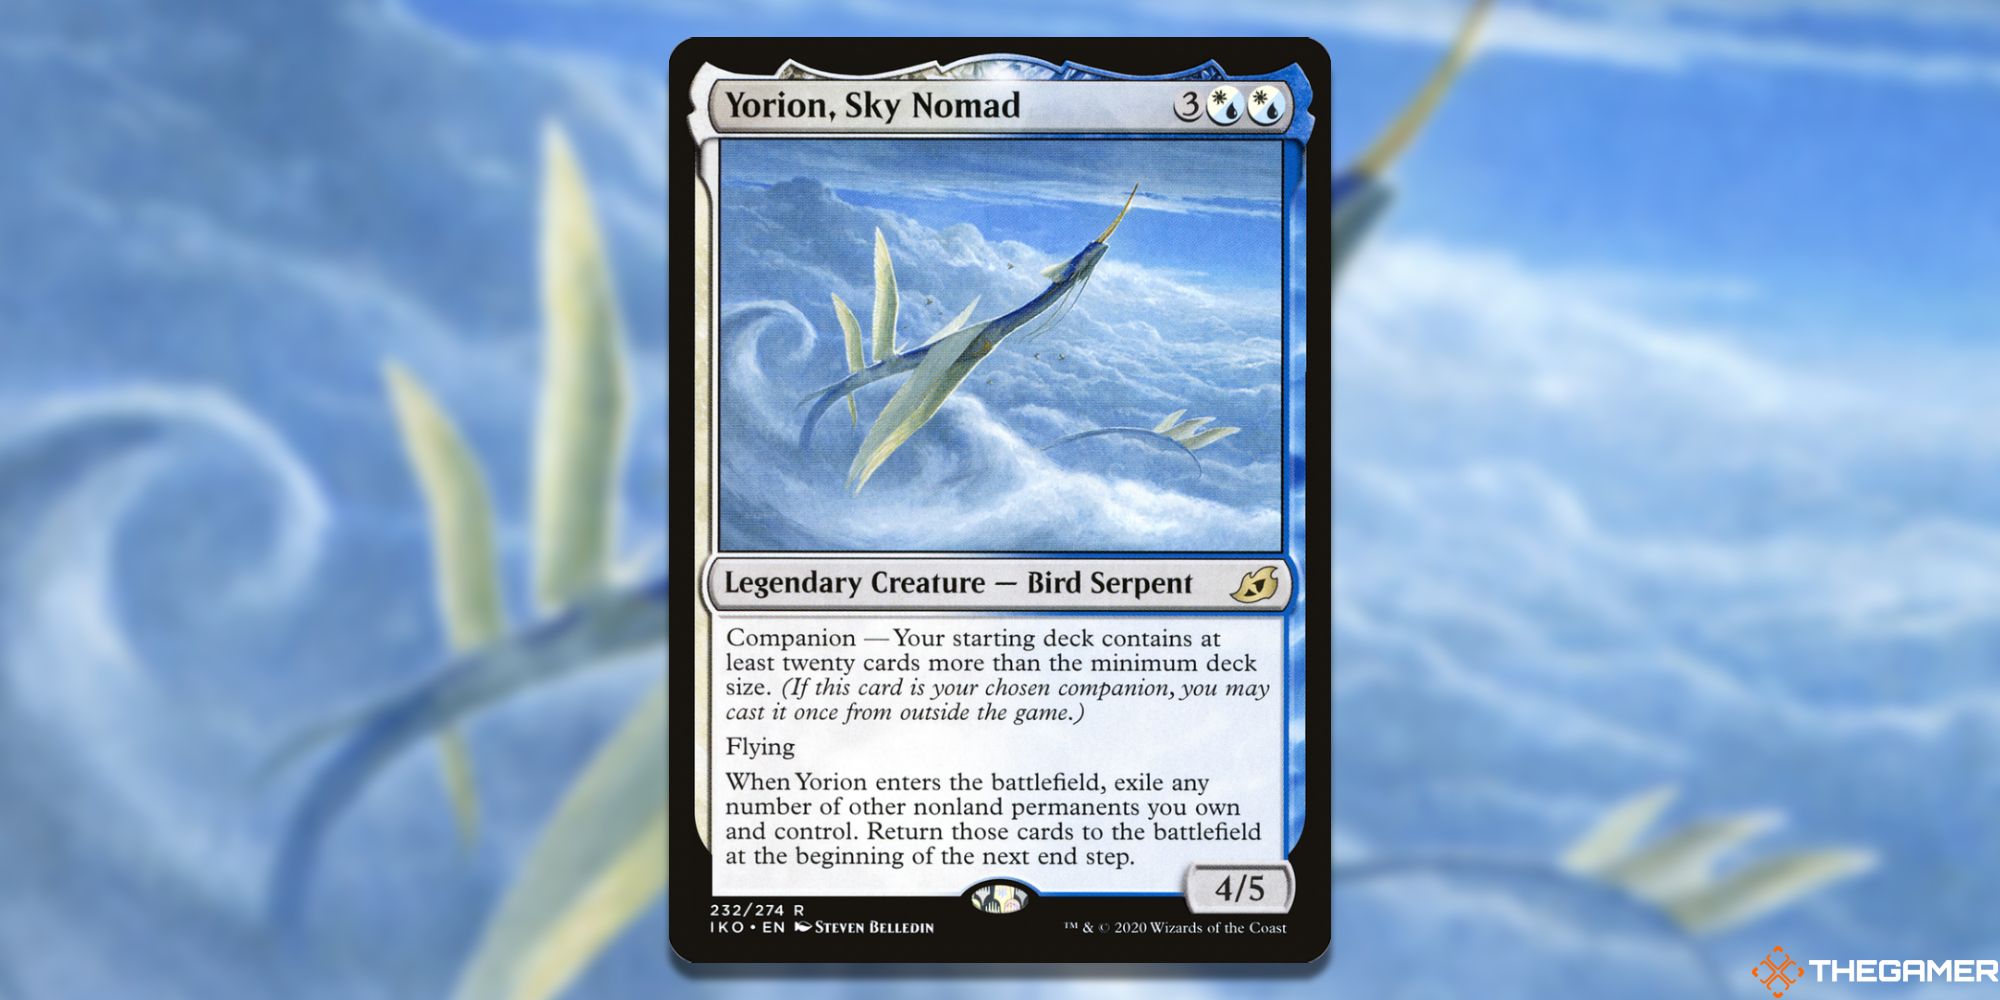 Image of the Yorion, Sky Nomad card in Magic: The Gathering, with art by Steven Belledin